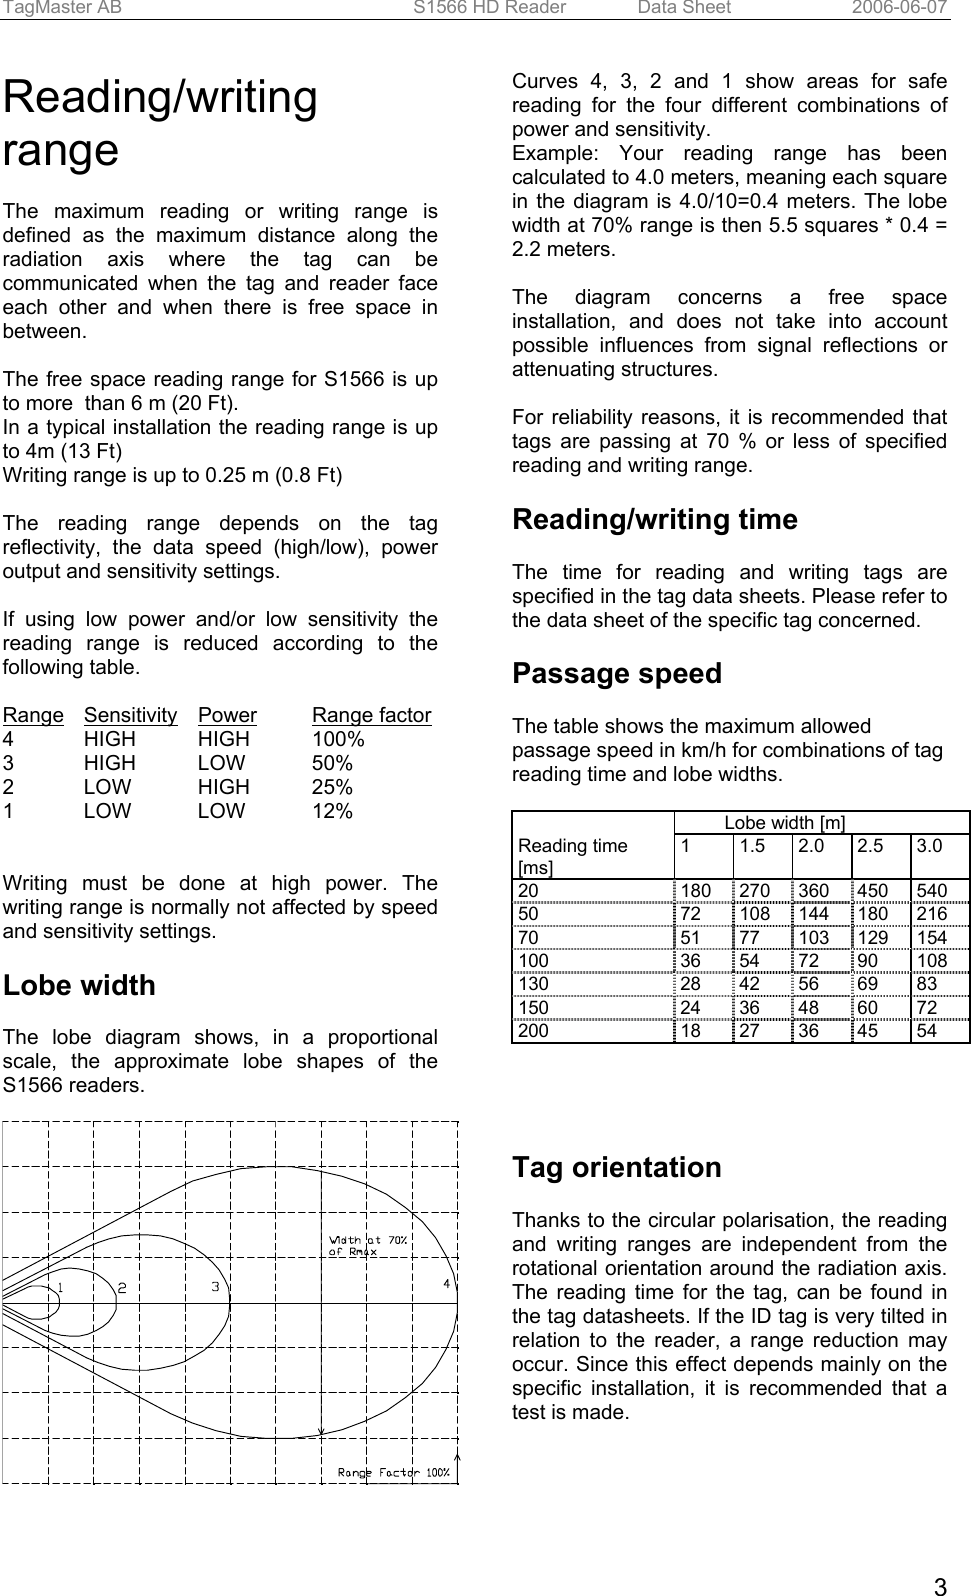 TagMaster AB  S1566 HD Reader   Data Sheet  2006-06-07  3Reading/writing range  The maximum reading or writing range is defined as the maximum distance along the radiation axis where the tag can be communicated when the tag and reader face each other and when there is free space in between.  The free space reading range for S1566 is up to more  than 6 m (20 Ft). In a typical installation the reading range is up to 4m (13 Ft) Writing range is up to 0.25 m (0.8 Ft)  The reading range depends on the tag reflectivity, the data speed (high/low), power output and sensitivity settings.   If using low power and/or low sensitivity the reading range is reduced according to the following table.  Range Sensitivity Power Range factor 4 HIGH HIGH 100% 3 HIGH LOW 50% 2 LOW HIGH 25% 1 LOW LOW 12%   Writing must be done at high power. The writing range is normally not affected by speed and sensitivity settings.  Lobe width  The lobe diagram shows, in a proportional scale, the approximate lobe shapes of the S1566 readers.     Curves 4, 3, 2 and 1 show areas for safe reading for the four different combinations of power and sensitivity.  Example: Your reading range has been calculated to 4.0 meters, meaning each square in the diagram is 4.0/10=0.4 meters. The lobe width at 70% range is then 5.5 squares * 0.4 = 2.2 meters.  The diagram concerns a free space installation, and does not take into account possible influences from signal reflections or attenuating structures.  For reliability reasons, it is recommended that tags are passing at 70 % or less of specified reading and writing range.  Reading/writing time  The time for reading and writing tags are specified in the tag data sheets. Please refer to the data sheet of the specific tag concerned.  Passage speed  The table shows the maximum allowed passage speed in km/h for combinations of tag reading time and lobe widths.    Lobe width [m]         Reading time [ms] 1 1.5 2.0 2.5 3.0 20  180 270 360 450 540 50 72 108 144 180 216 70 51 77 103 129 154 100  36 54 72 90 108 130  28 42 56 69 83 150  24 36 48 60 72 200  18 27 36 45 54     Tag orientation  Thanks to the circular polarisation, the reading and writing ranges are independent from the rotational orientation around the radiation axis. The reading time for the tag, can be found in the tag datasheets. If the ID tag is very tilted in relation to the reader, a range reduction may occur. Since this effect depends mainly on the specific installation, it is recommended that a test is made.       